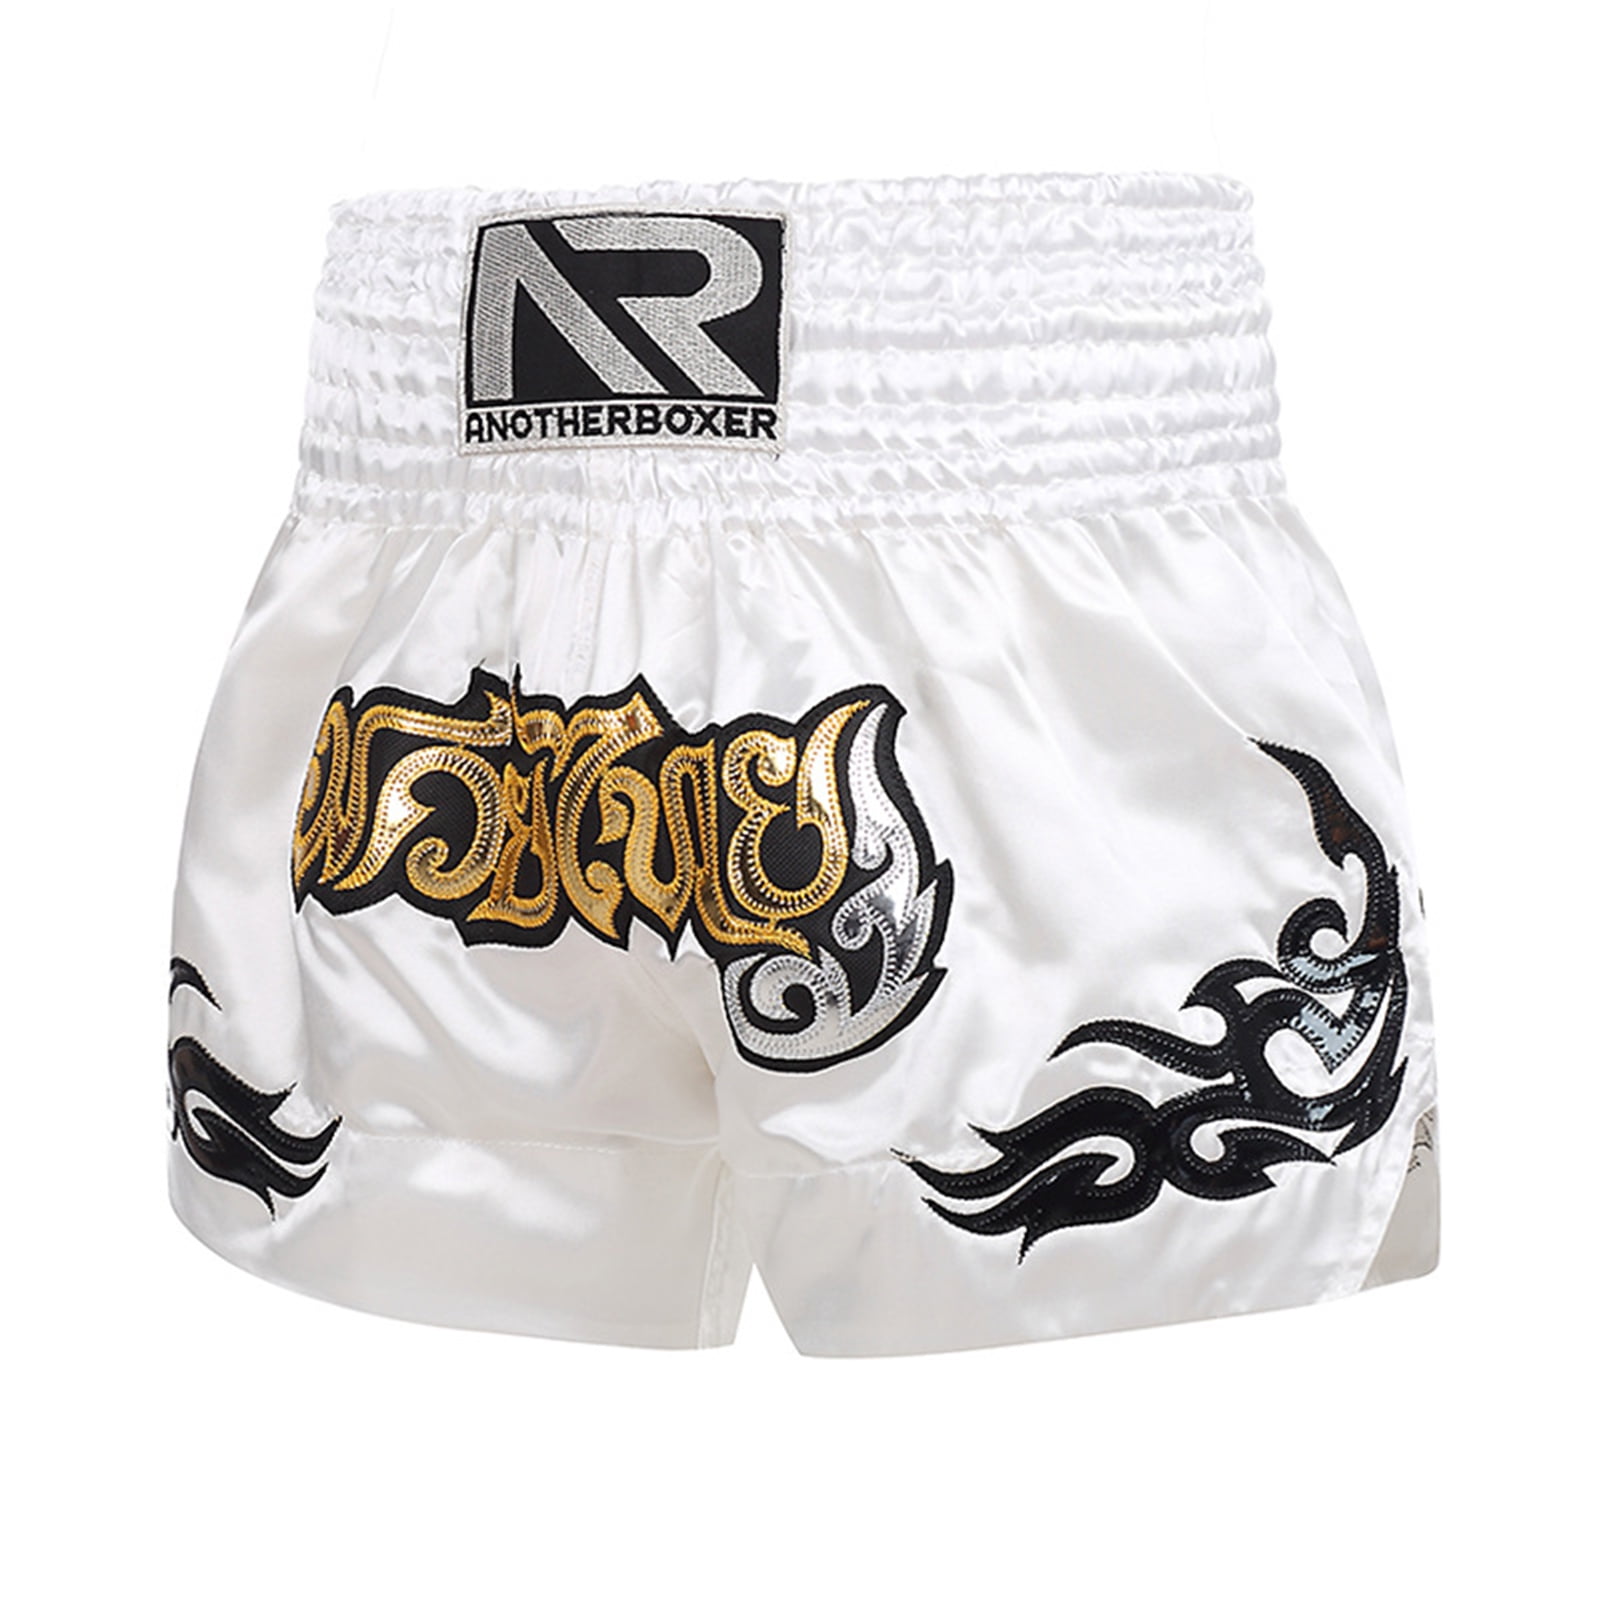 Anotherboxer Shorts Boxing Breathable Fitness Kickboxing Muay Thai Durable